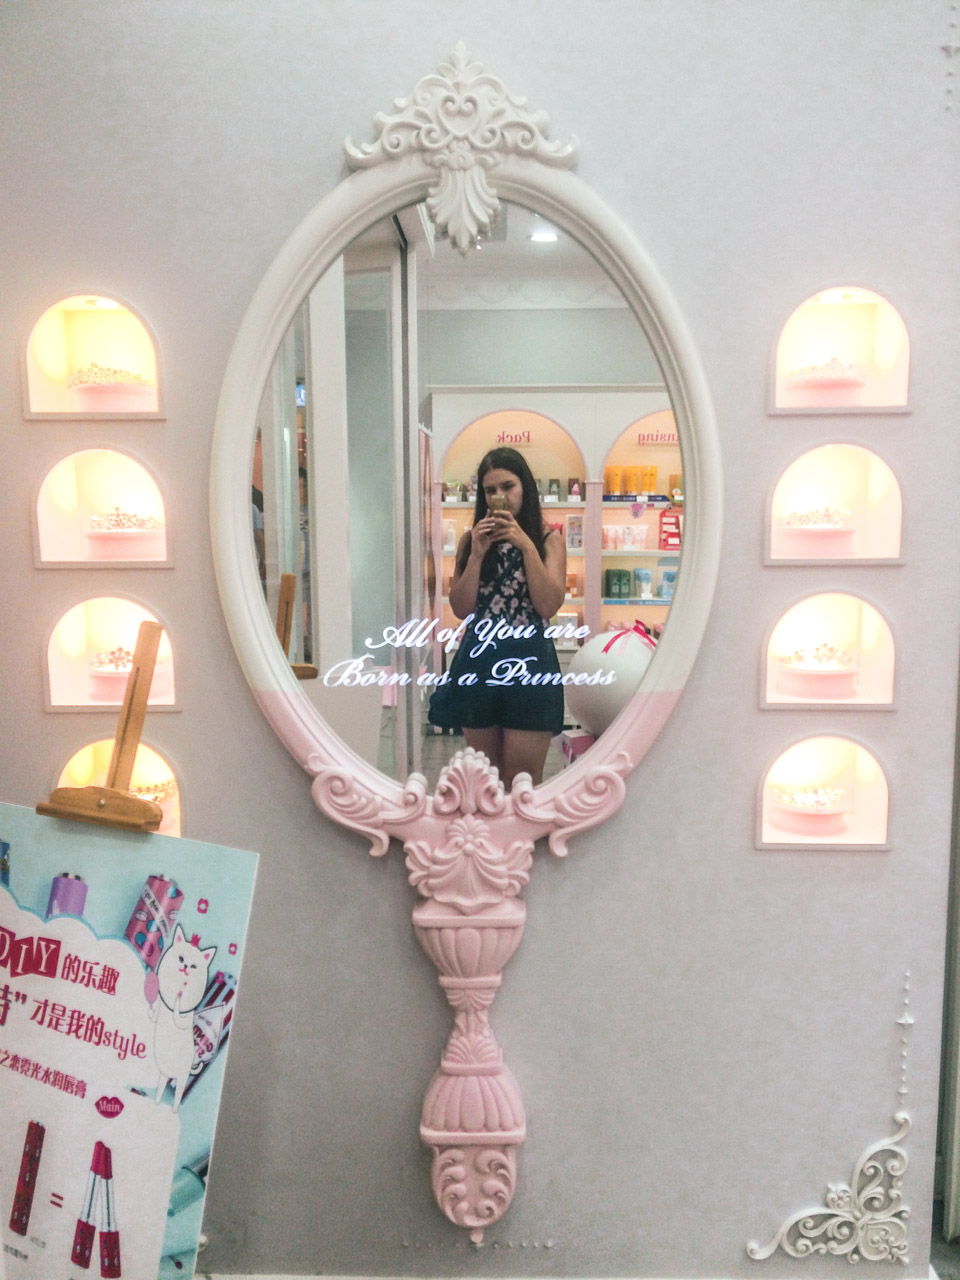 A dark-haired woman taking a selfie in a giant pink hand mirror hanging on a wall